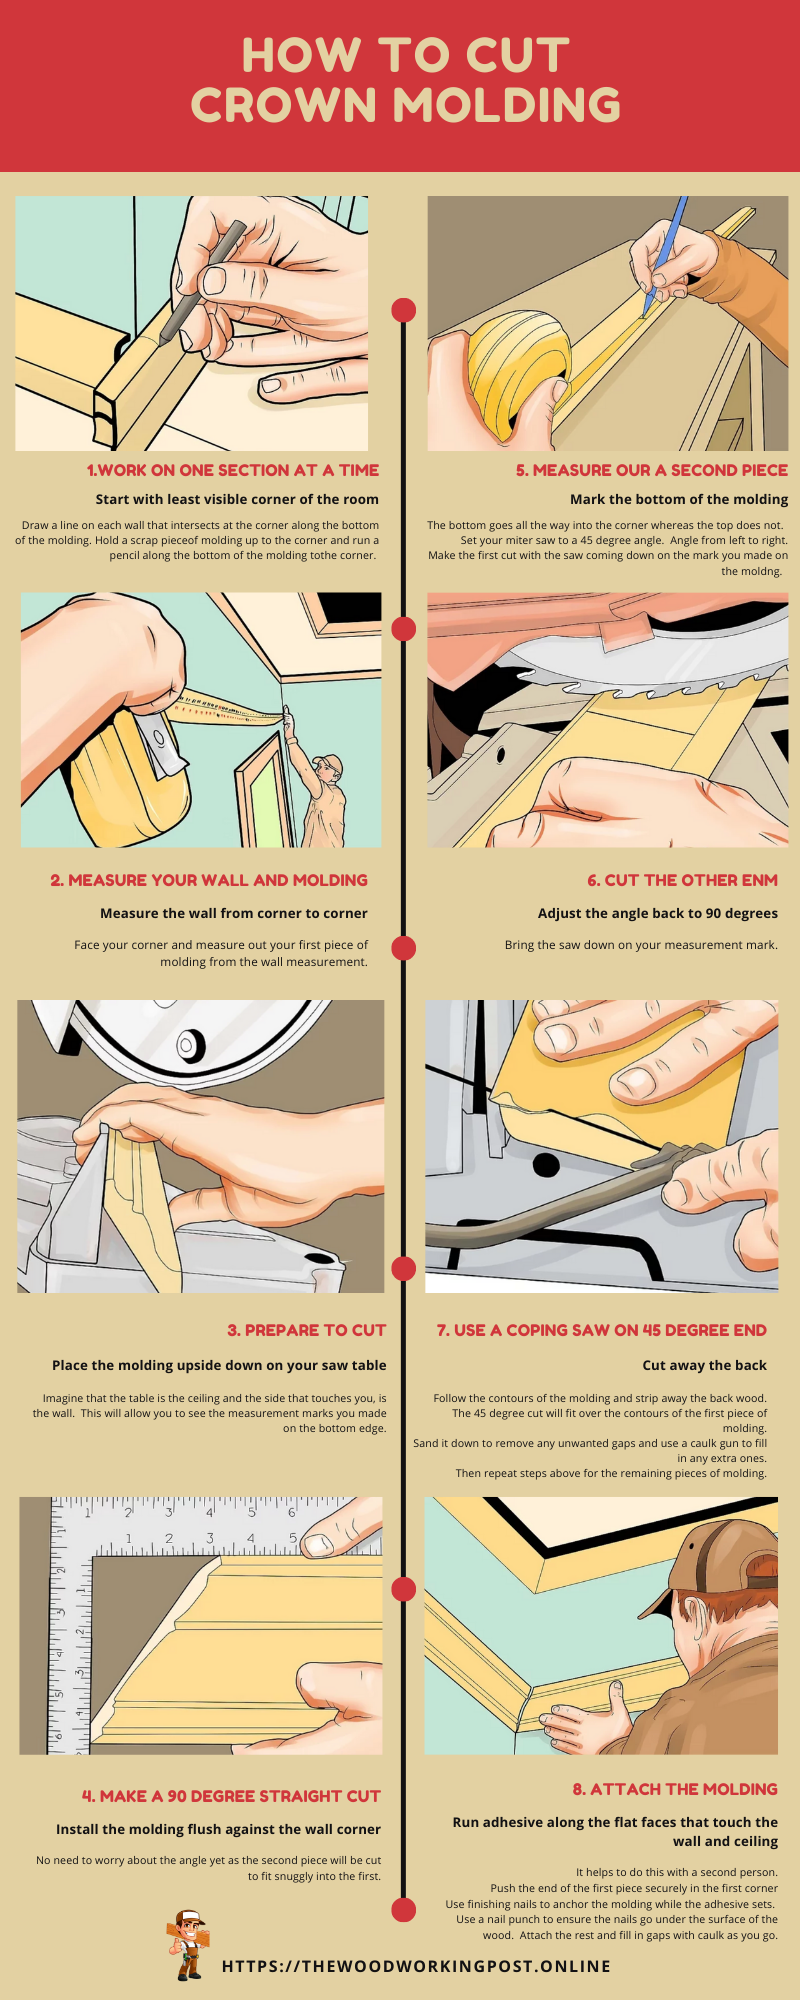 How to cut crown molding infographic